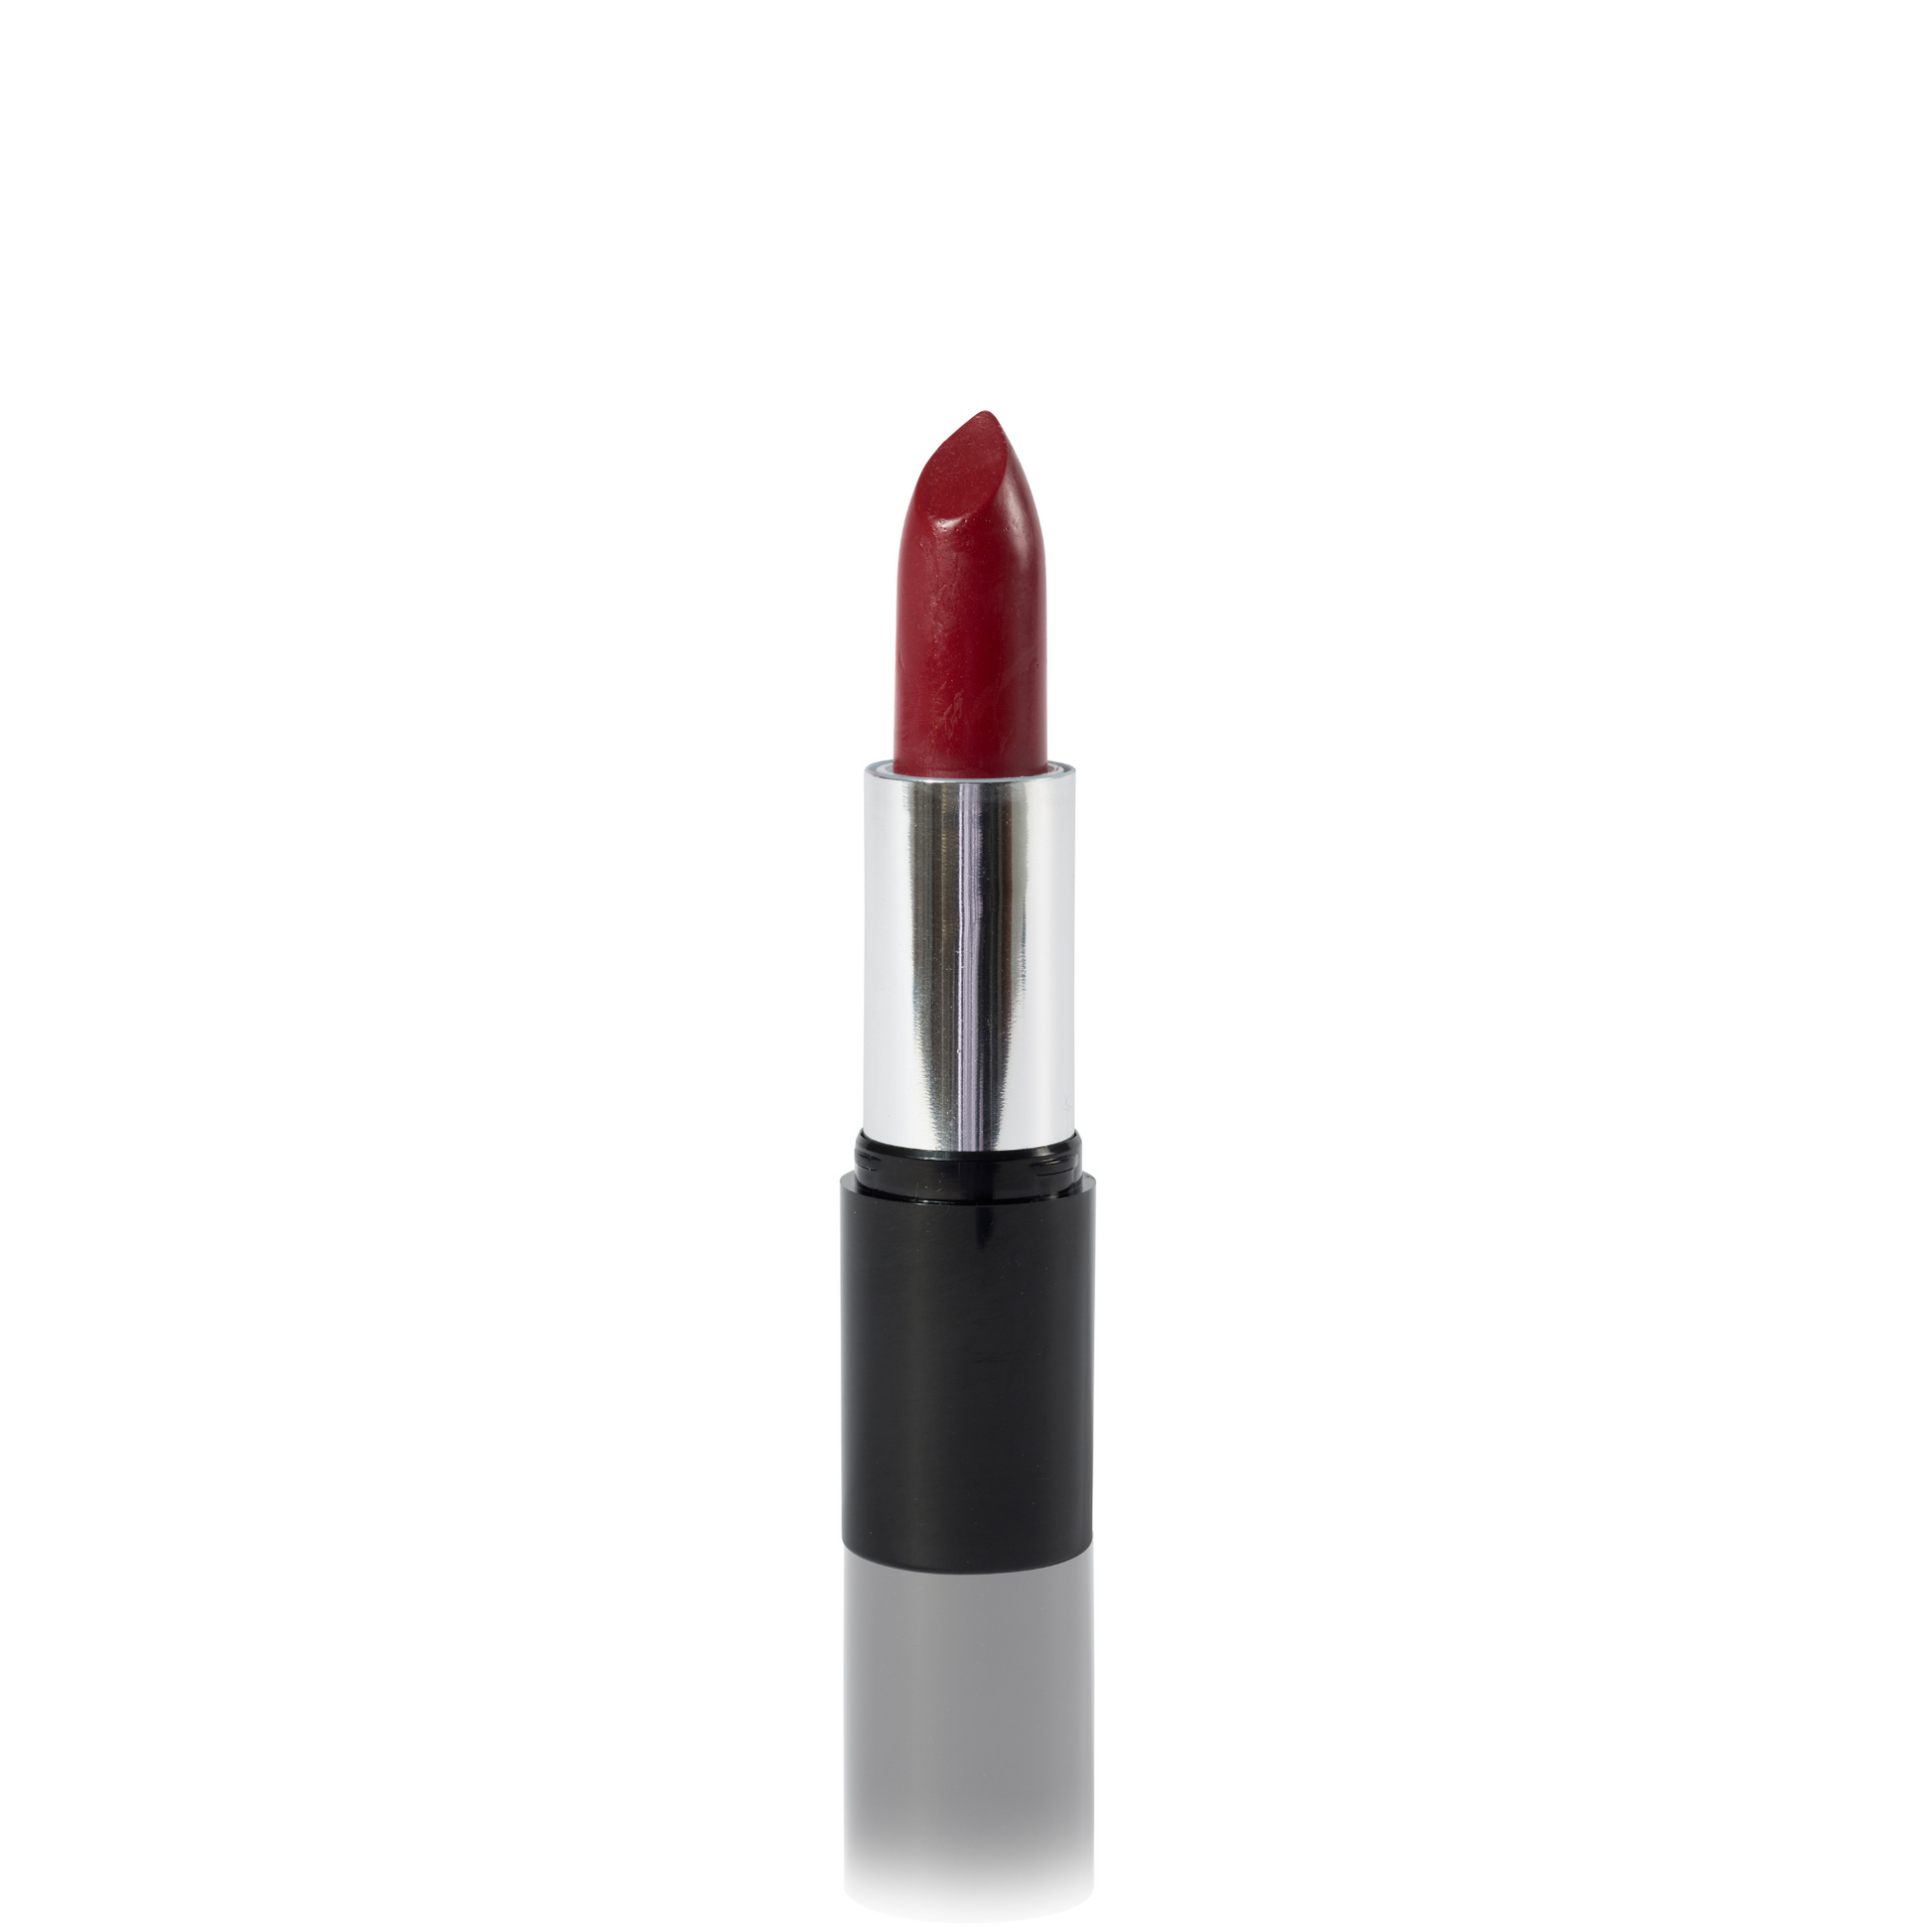 A single tube of the odylique cherry tart natural lipstick with the cap removed, revealing the red/cherry shade, set against a plain white background.